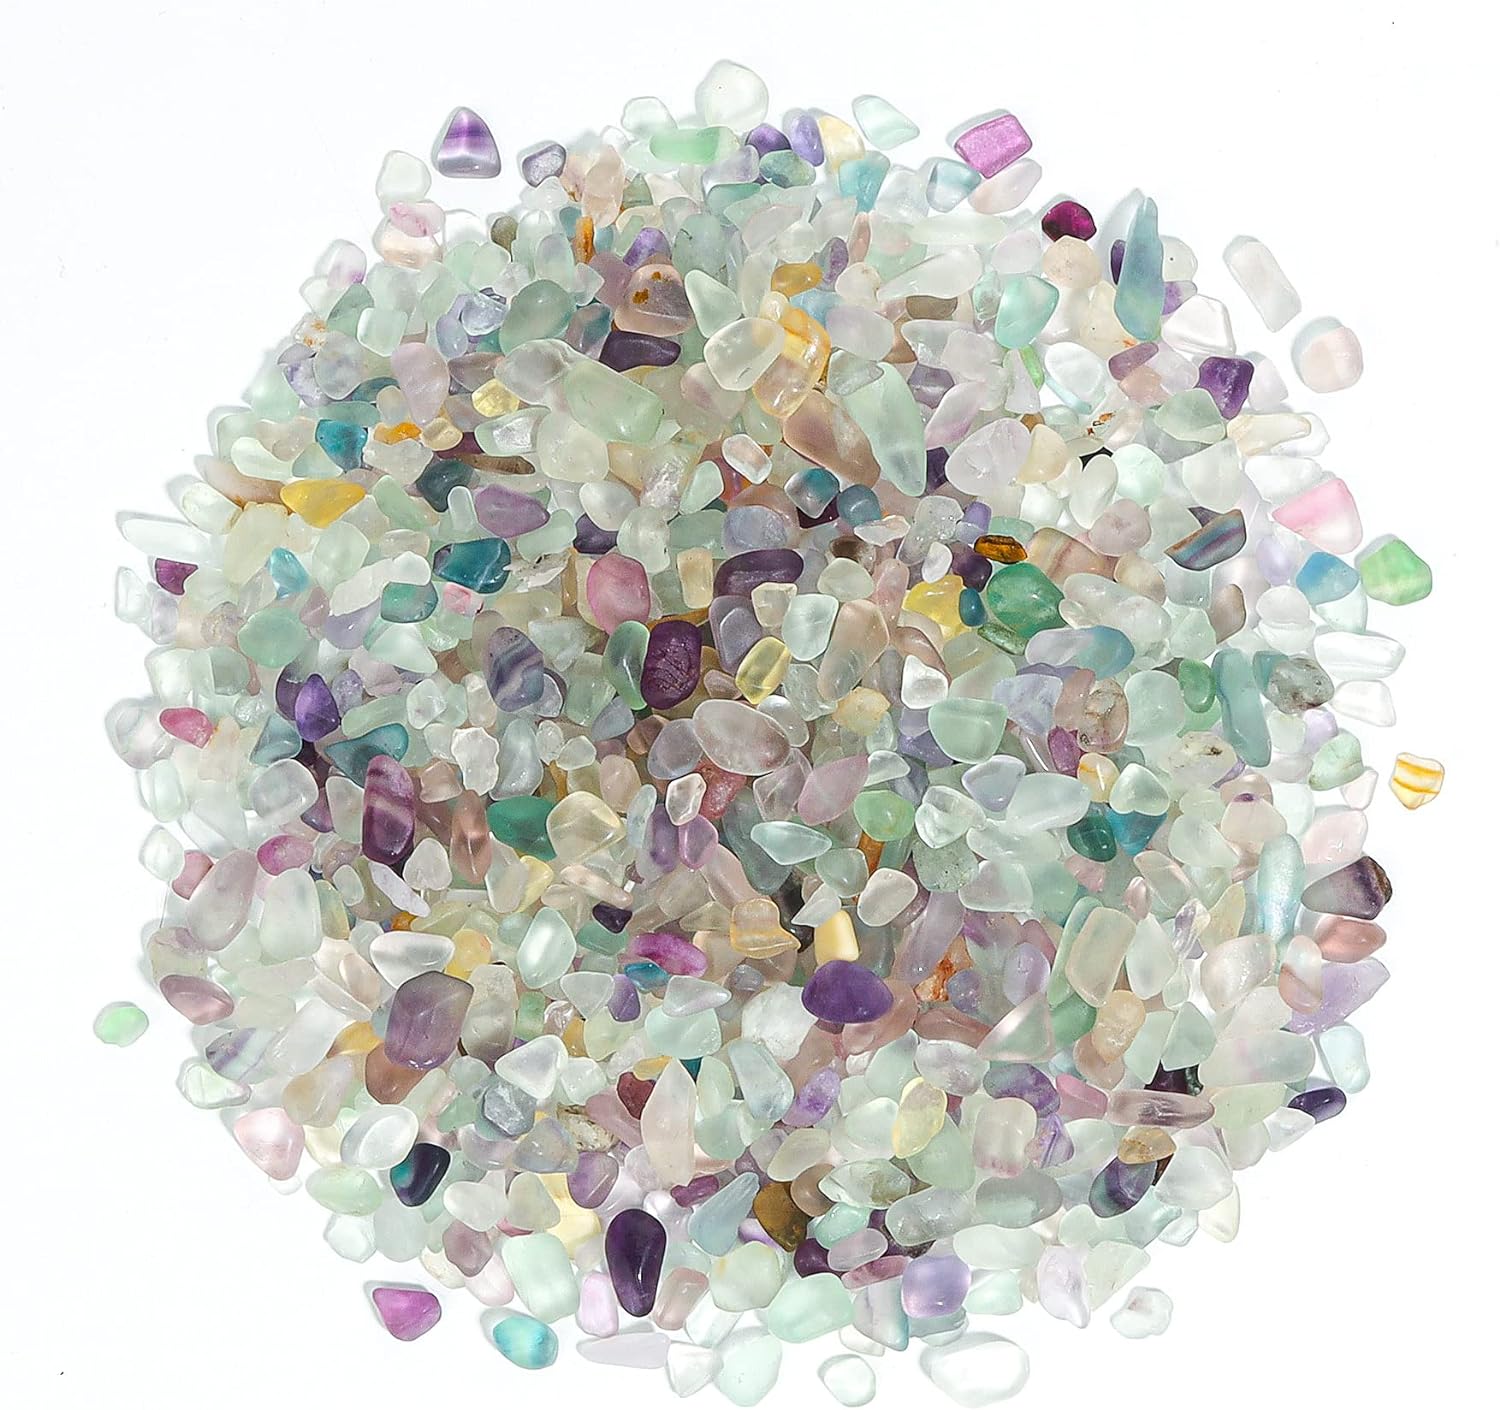 Buy Crushed Glass: Wholesale Glass Chips